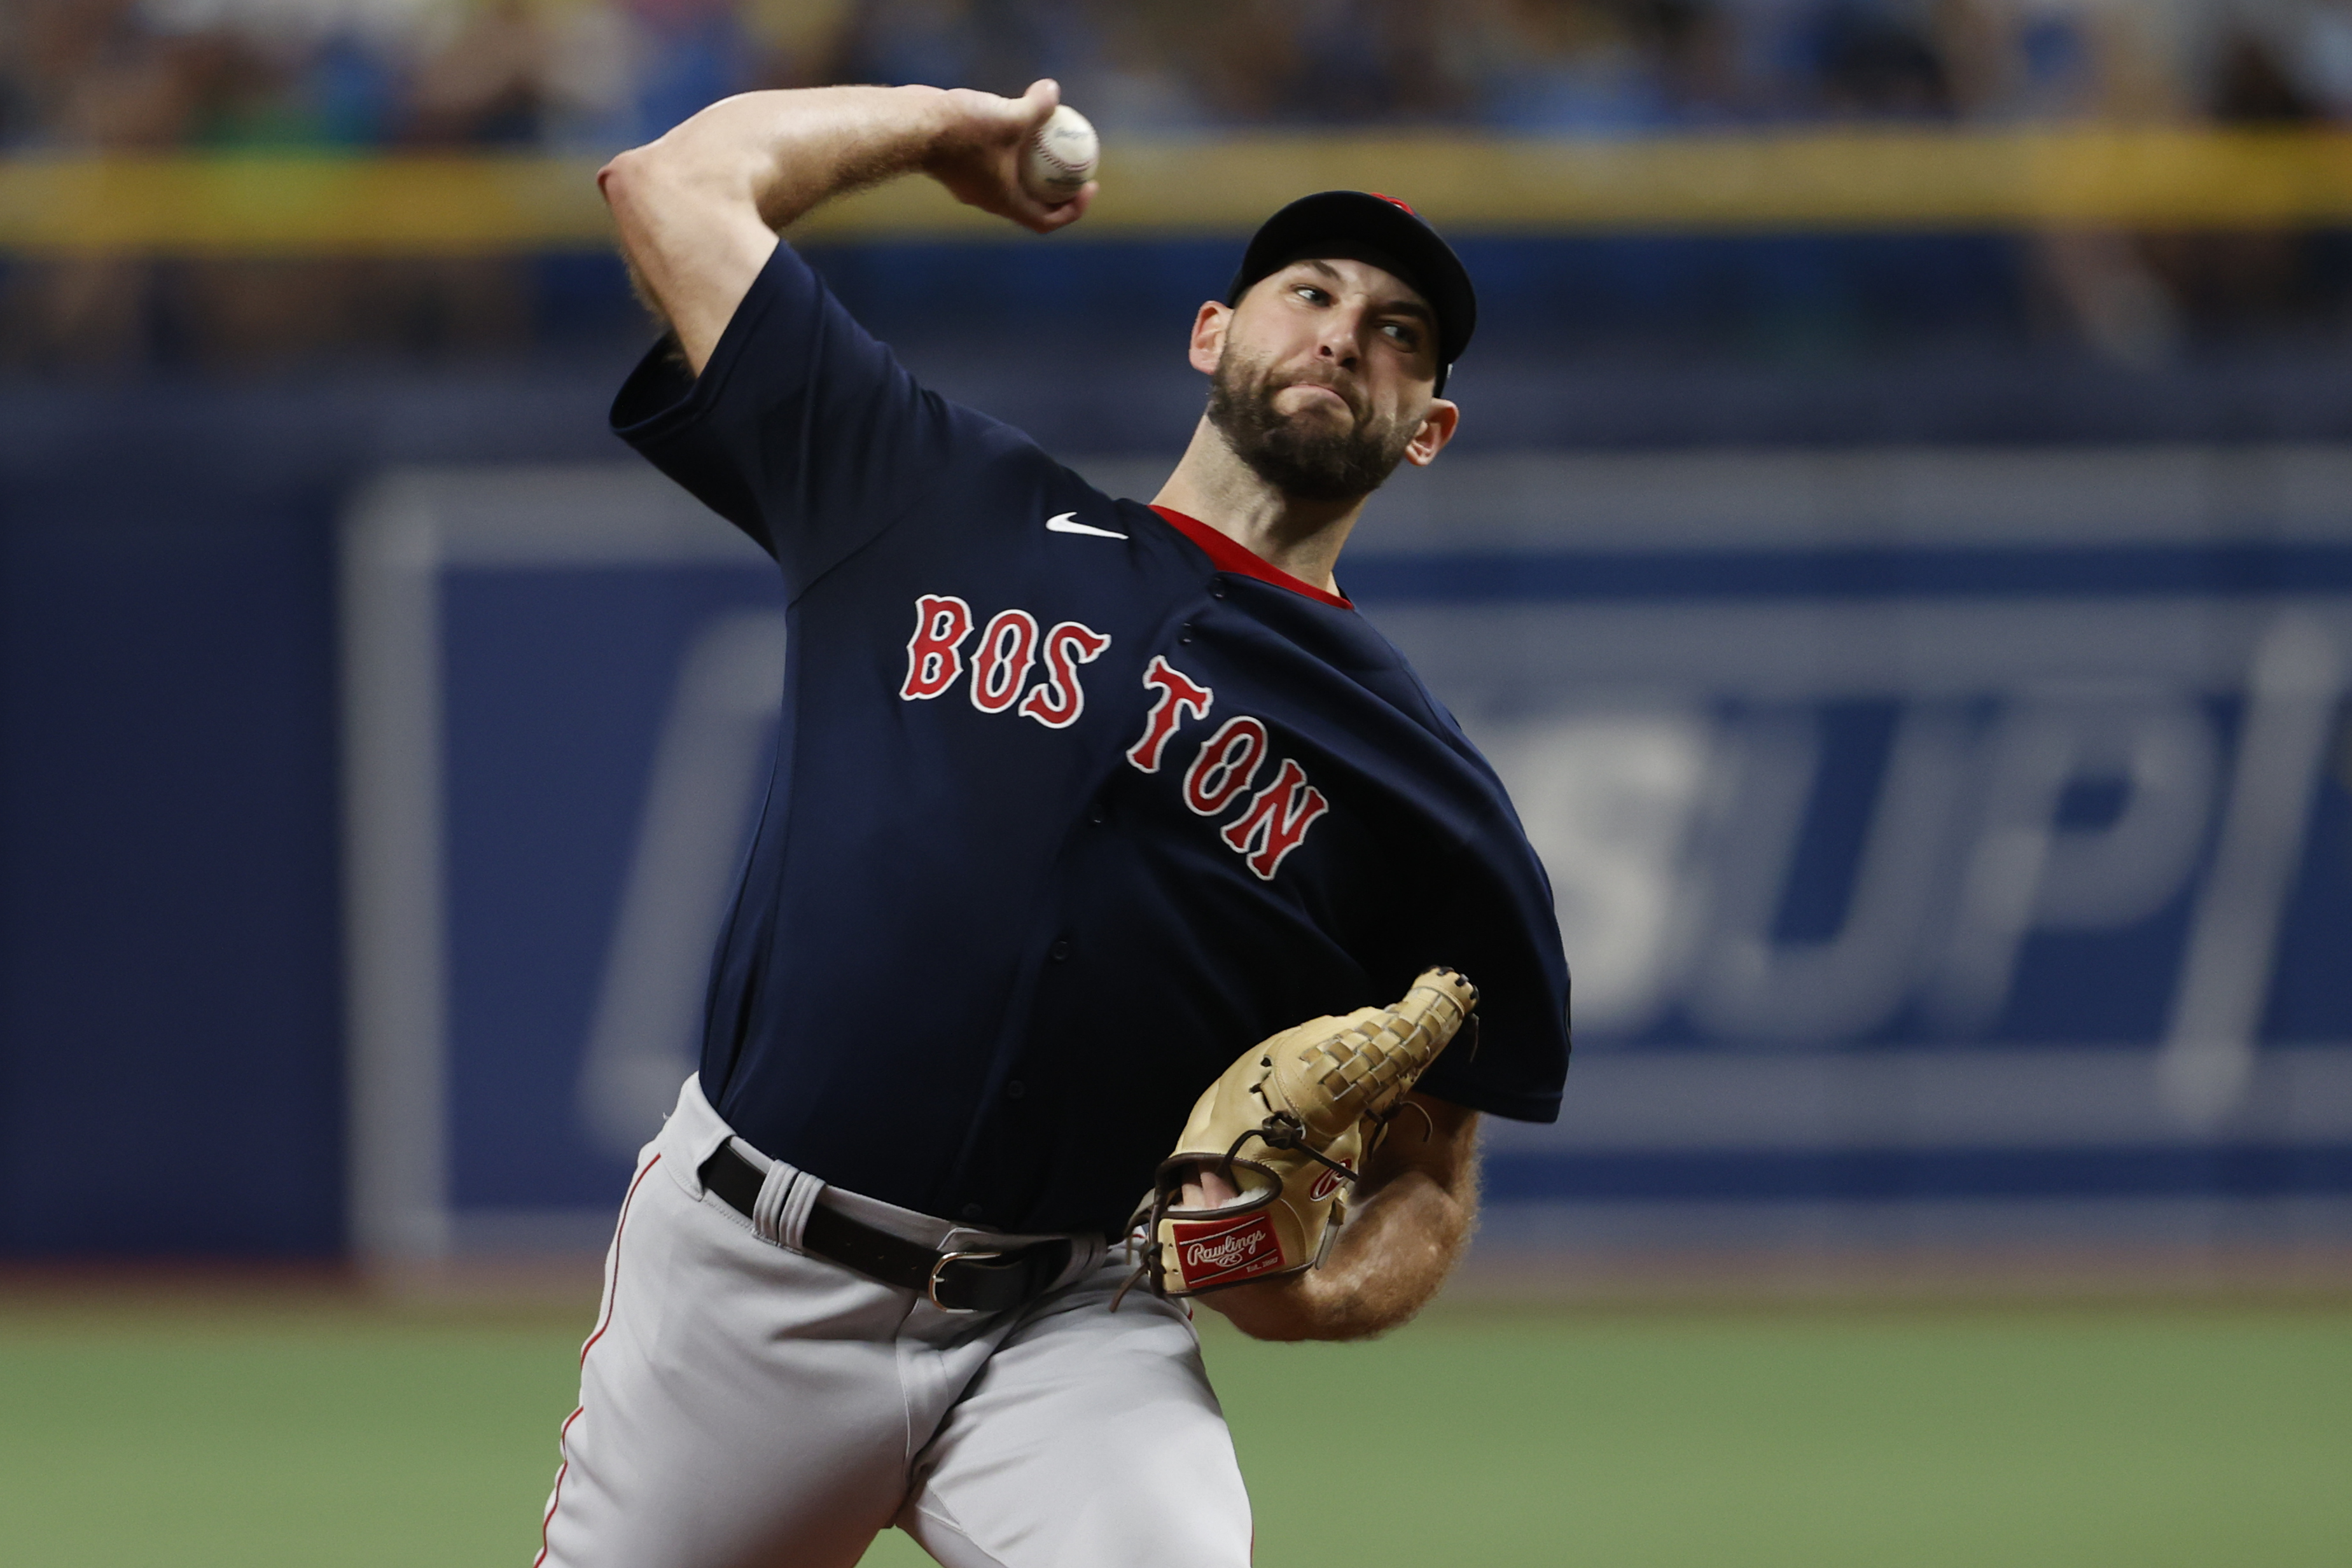 Relegated to the Boston Red Sox bullpen, struggles on the mound